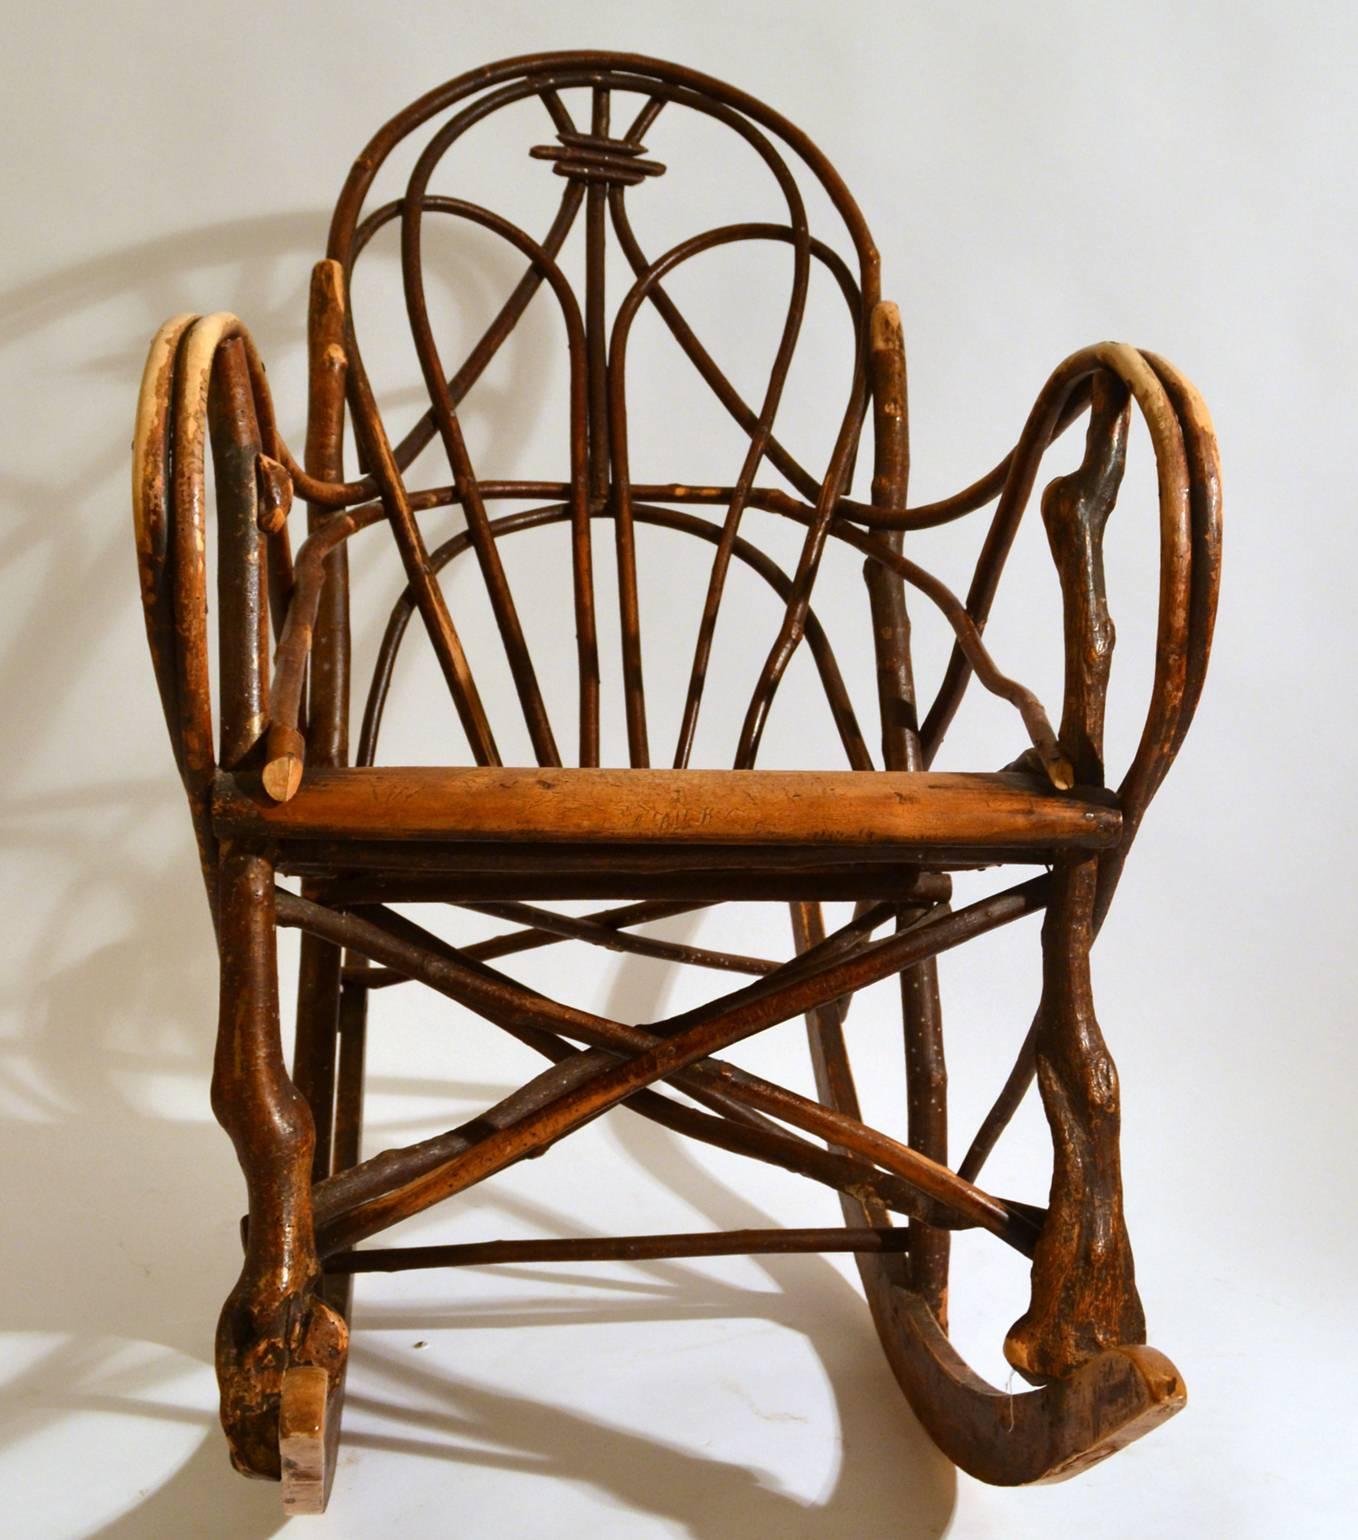 Scandinavian early 20th century rocking chair crafted and constructed in knotted wood and bentwood willow with a wooden slat seat. The rocking slats and seat are made of bent wood.
Extremely comfortable, relaxing and strong and with real sculptural